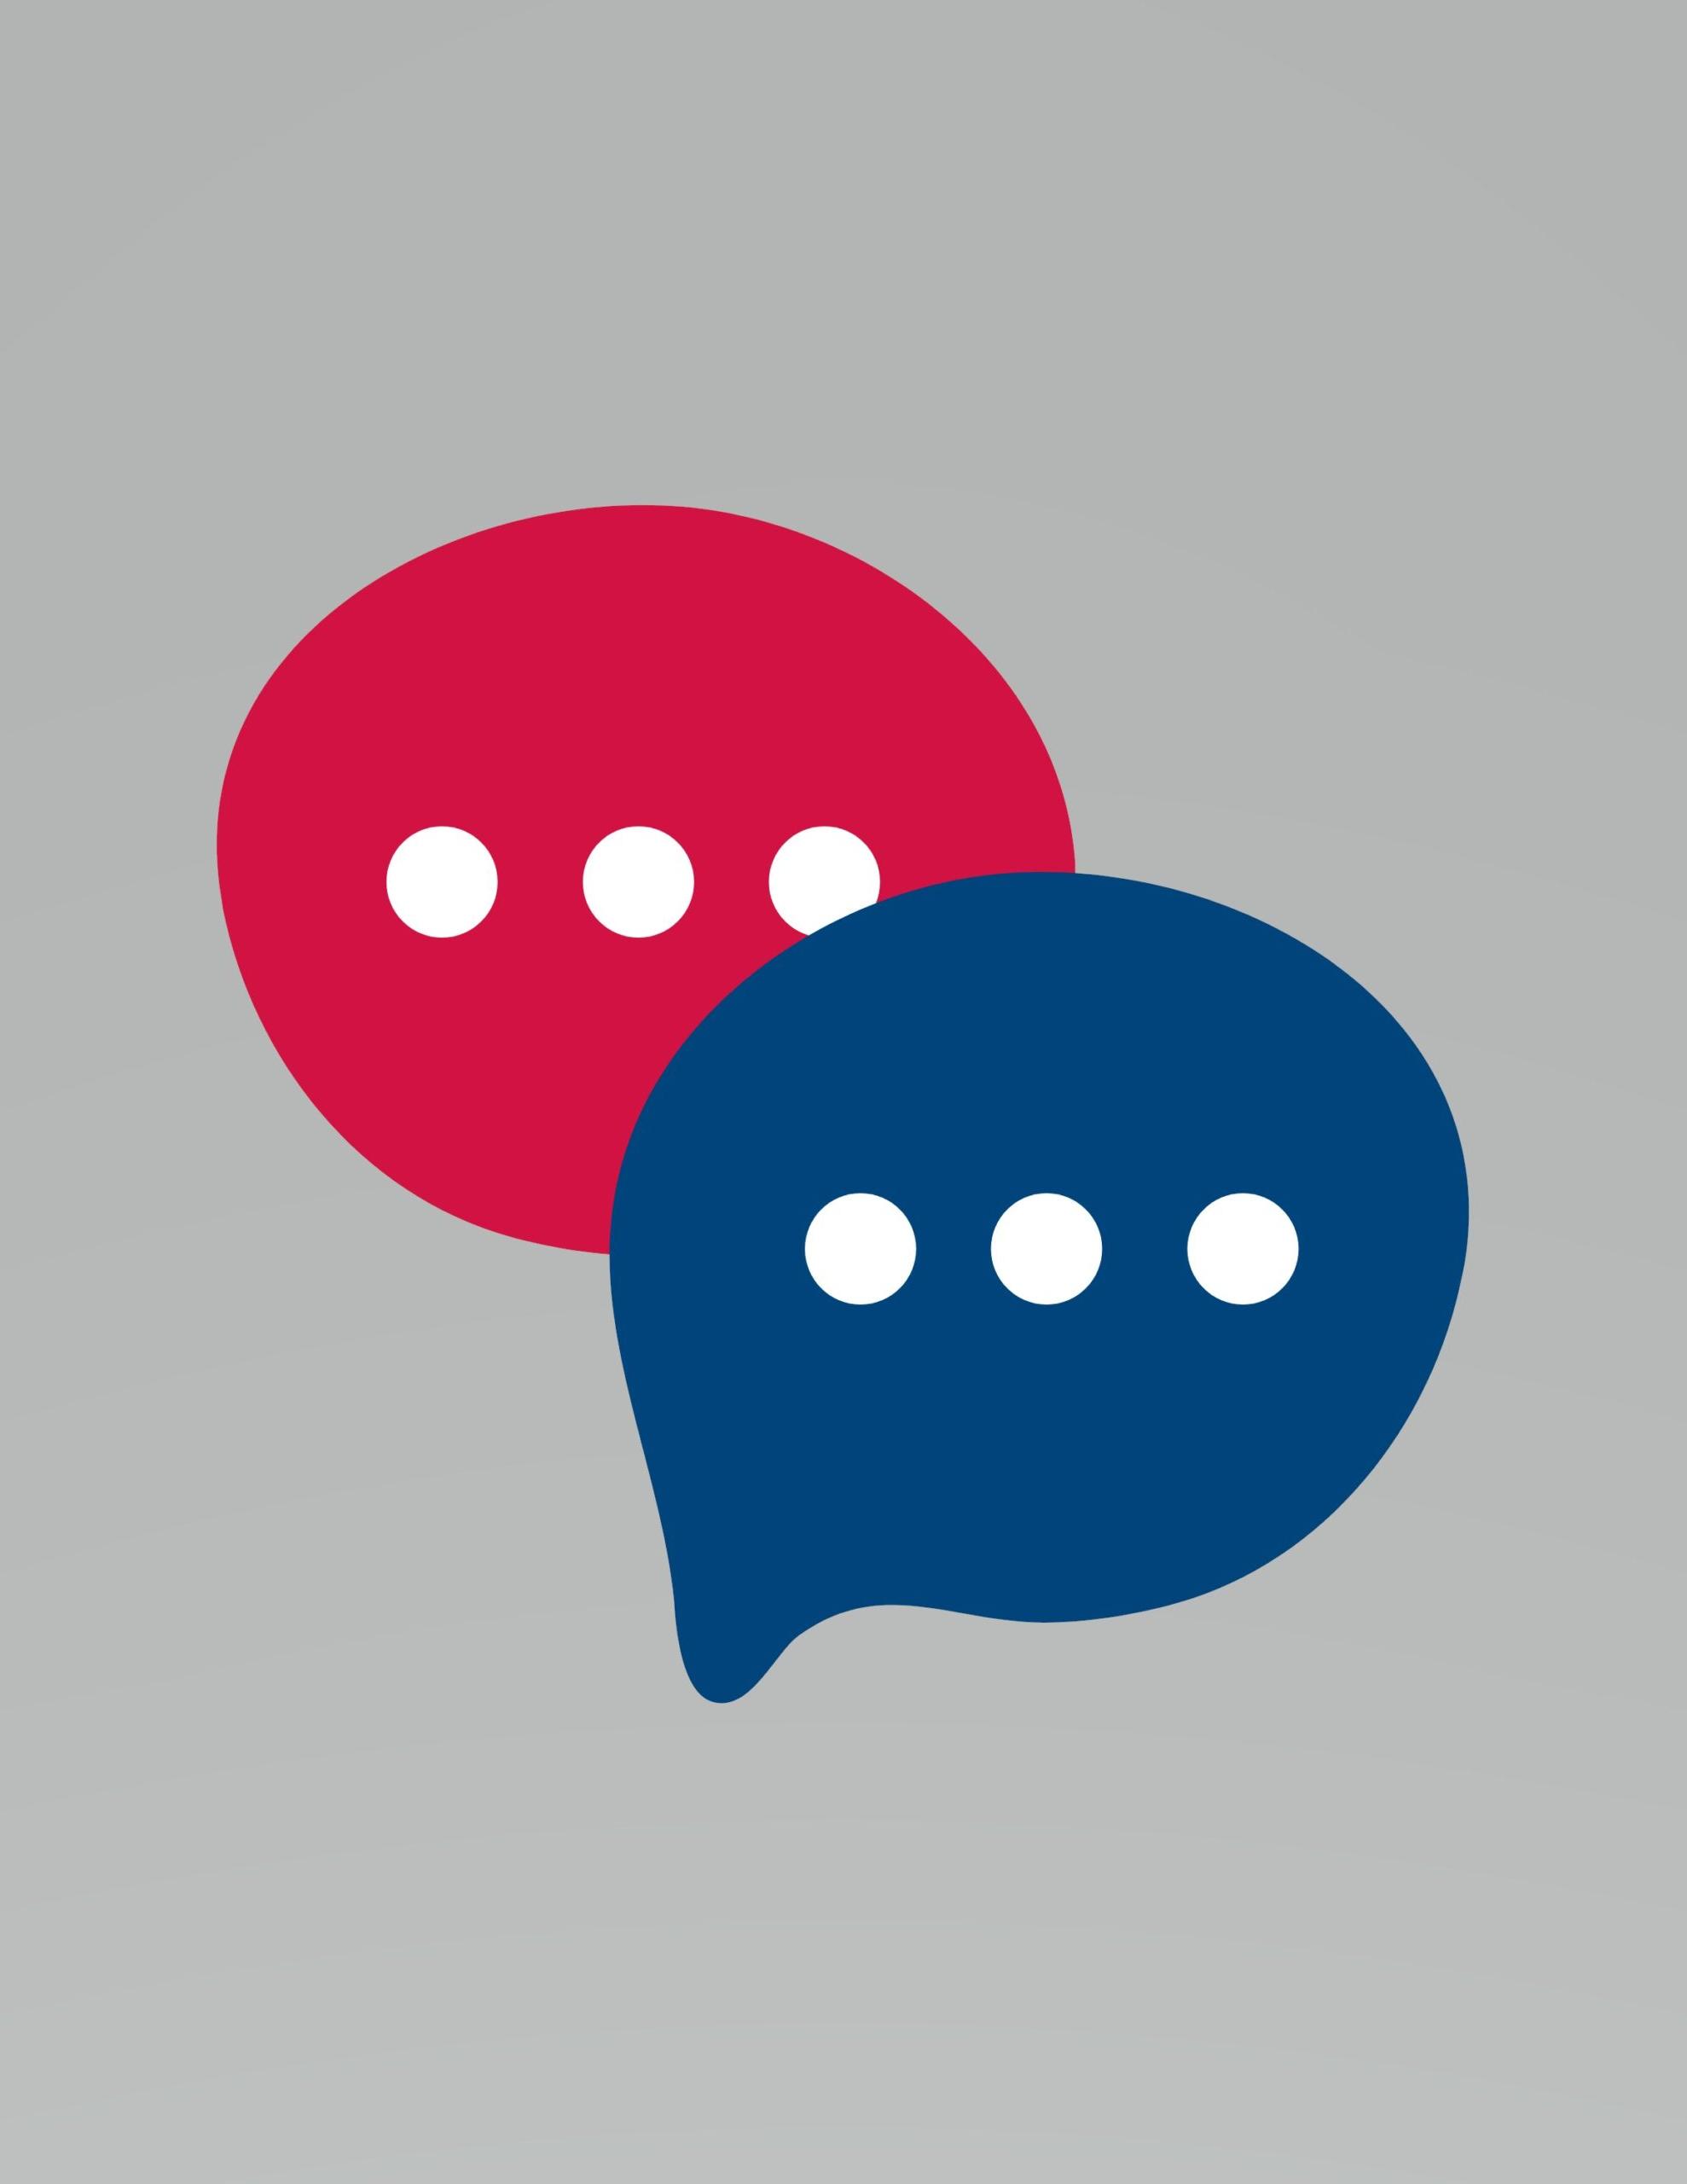 Graphic of two online chat icons